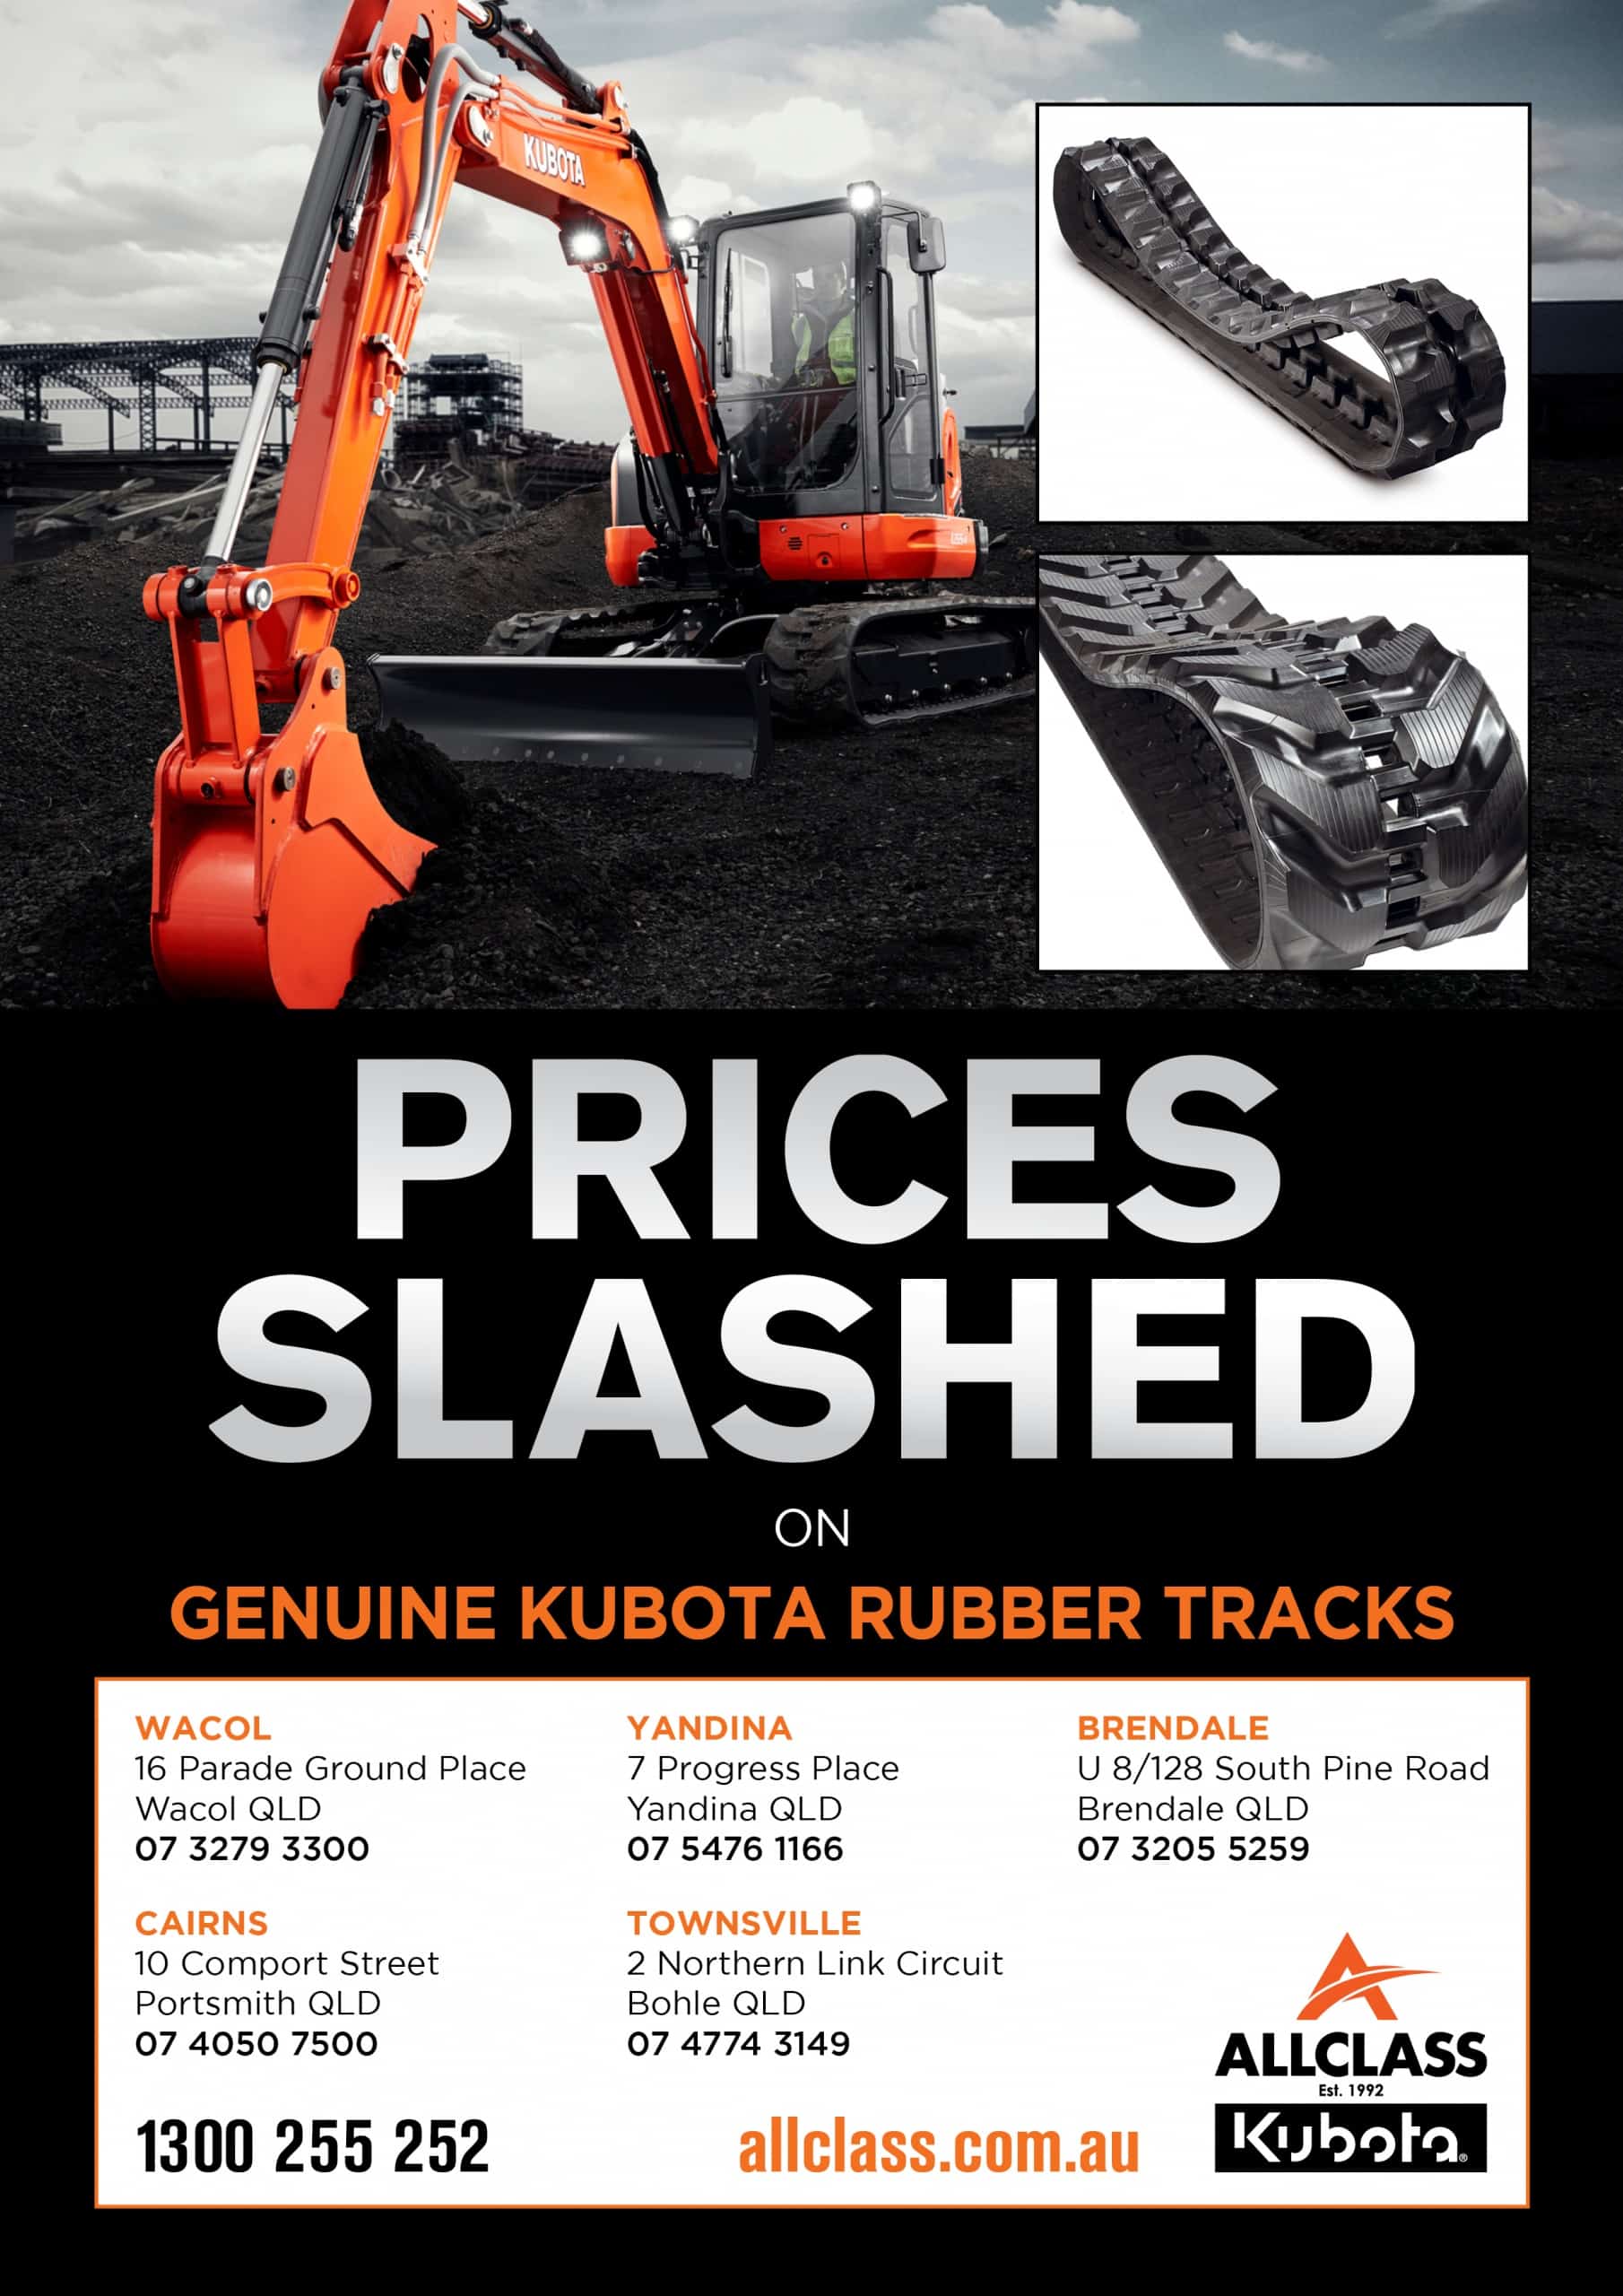 Allclass Flyer image for Kubota Rubber Tracks with Excavator, Location and contact details